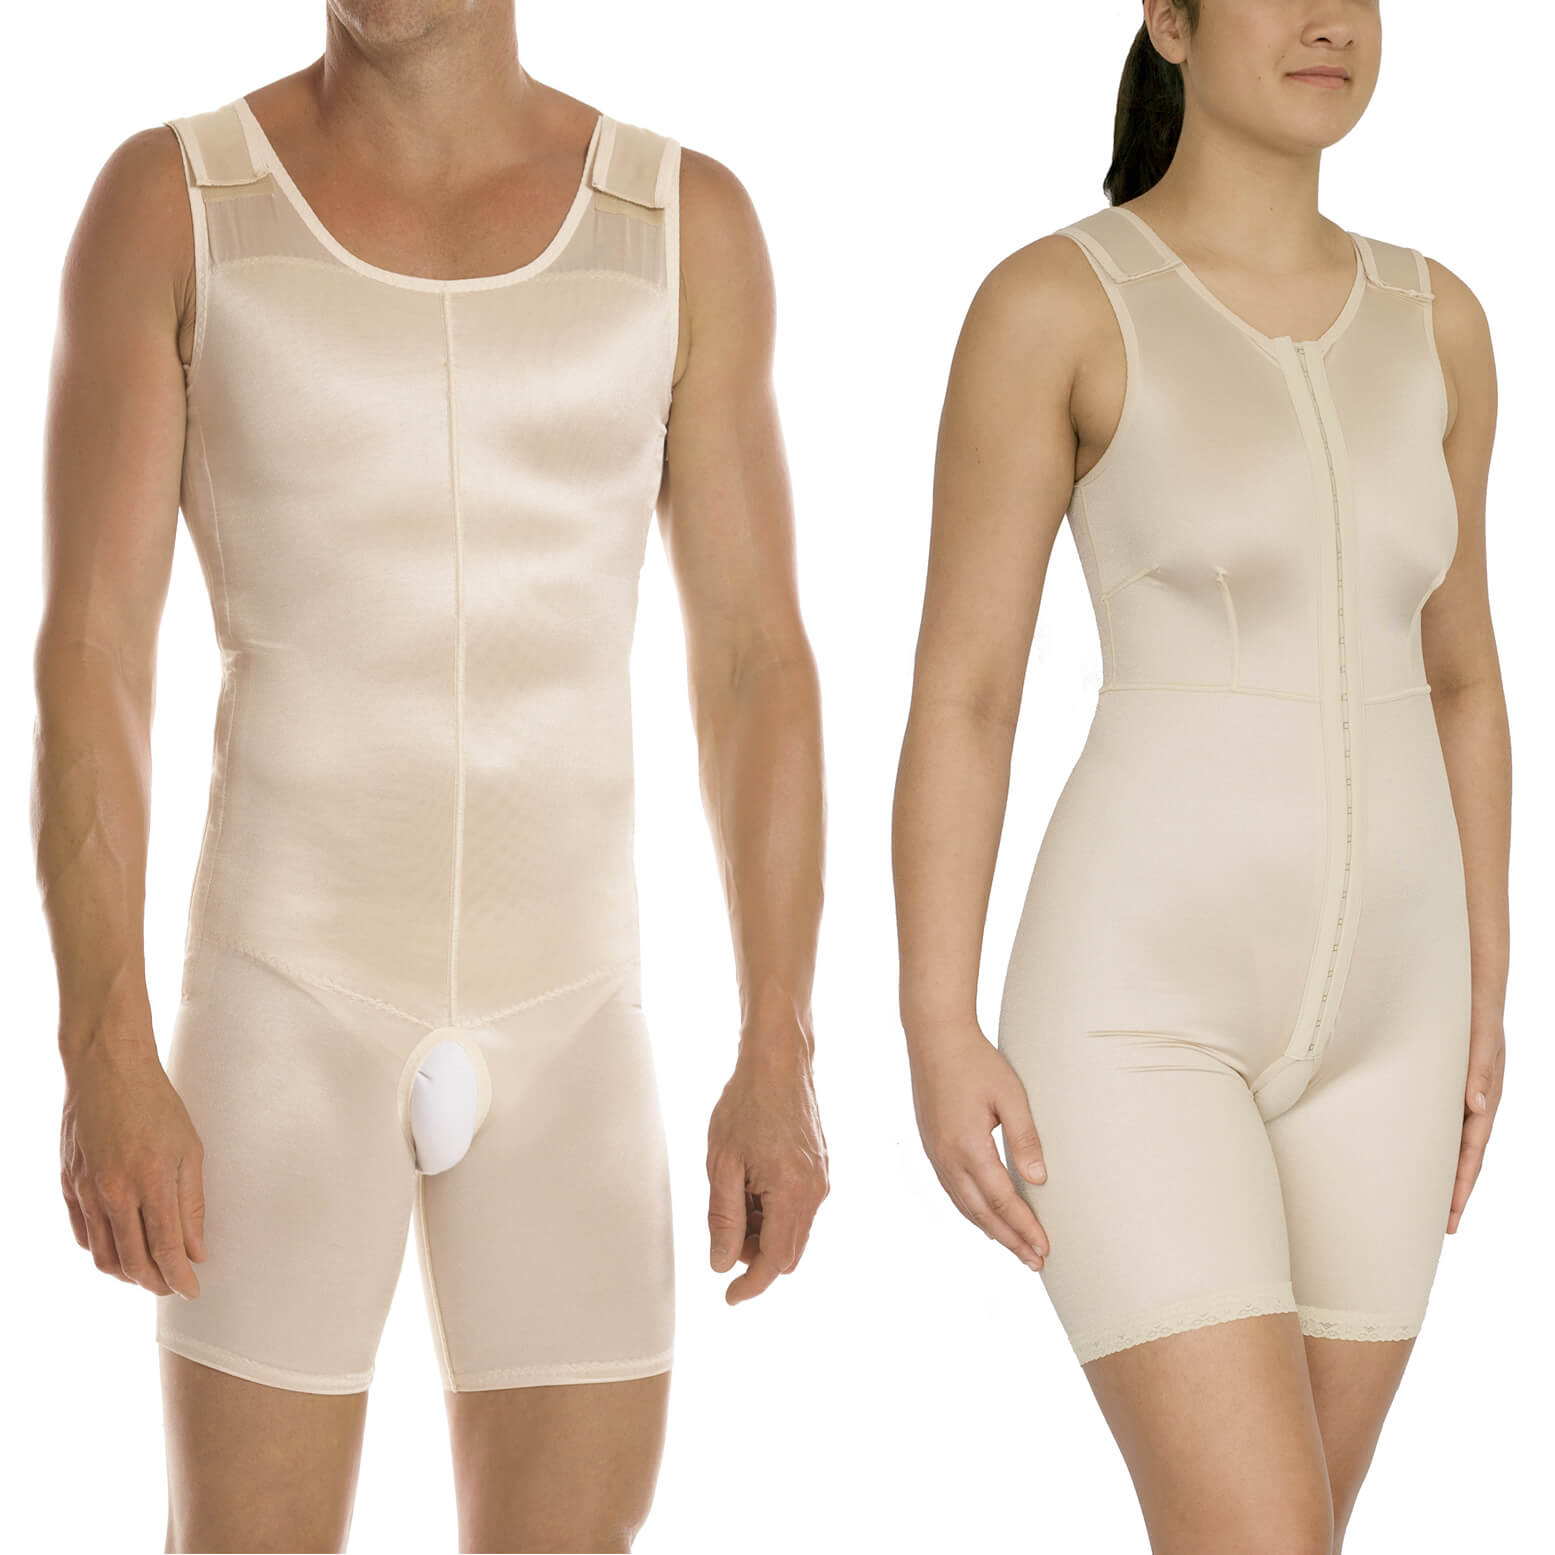 Made to Measure Compression Overalls  Sculpture Garments - NZ Made Compression  Garments & Pressurewear